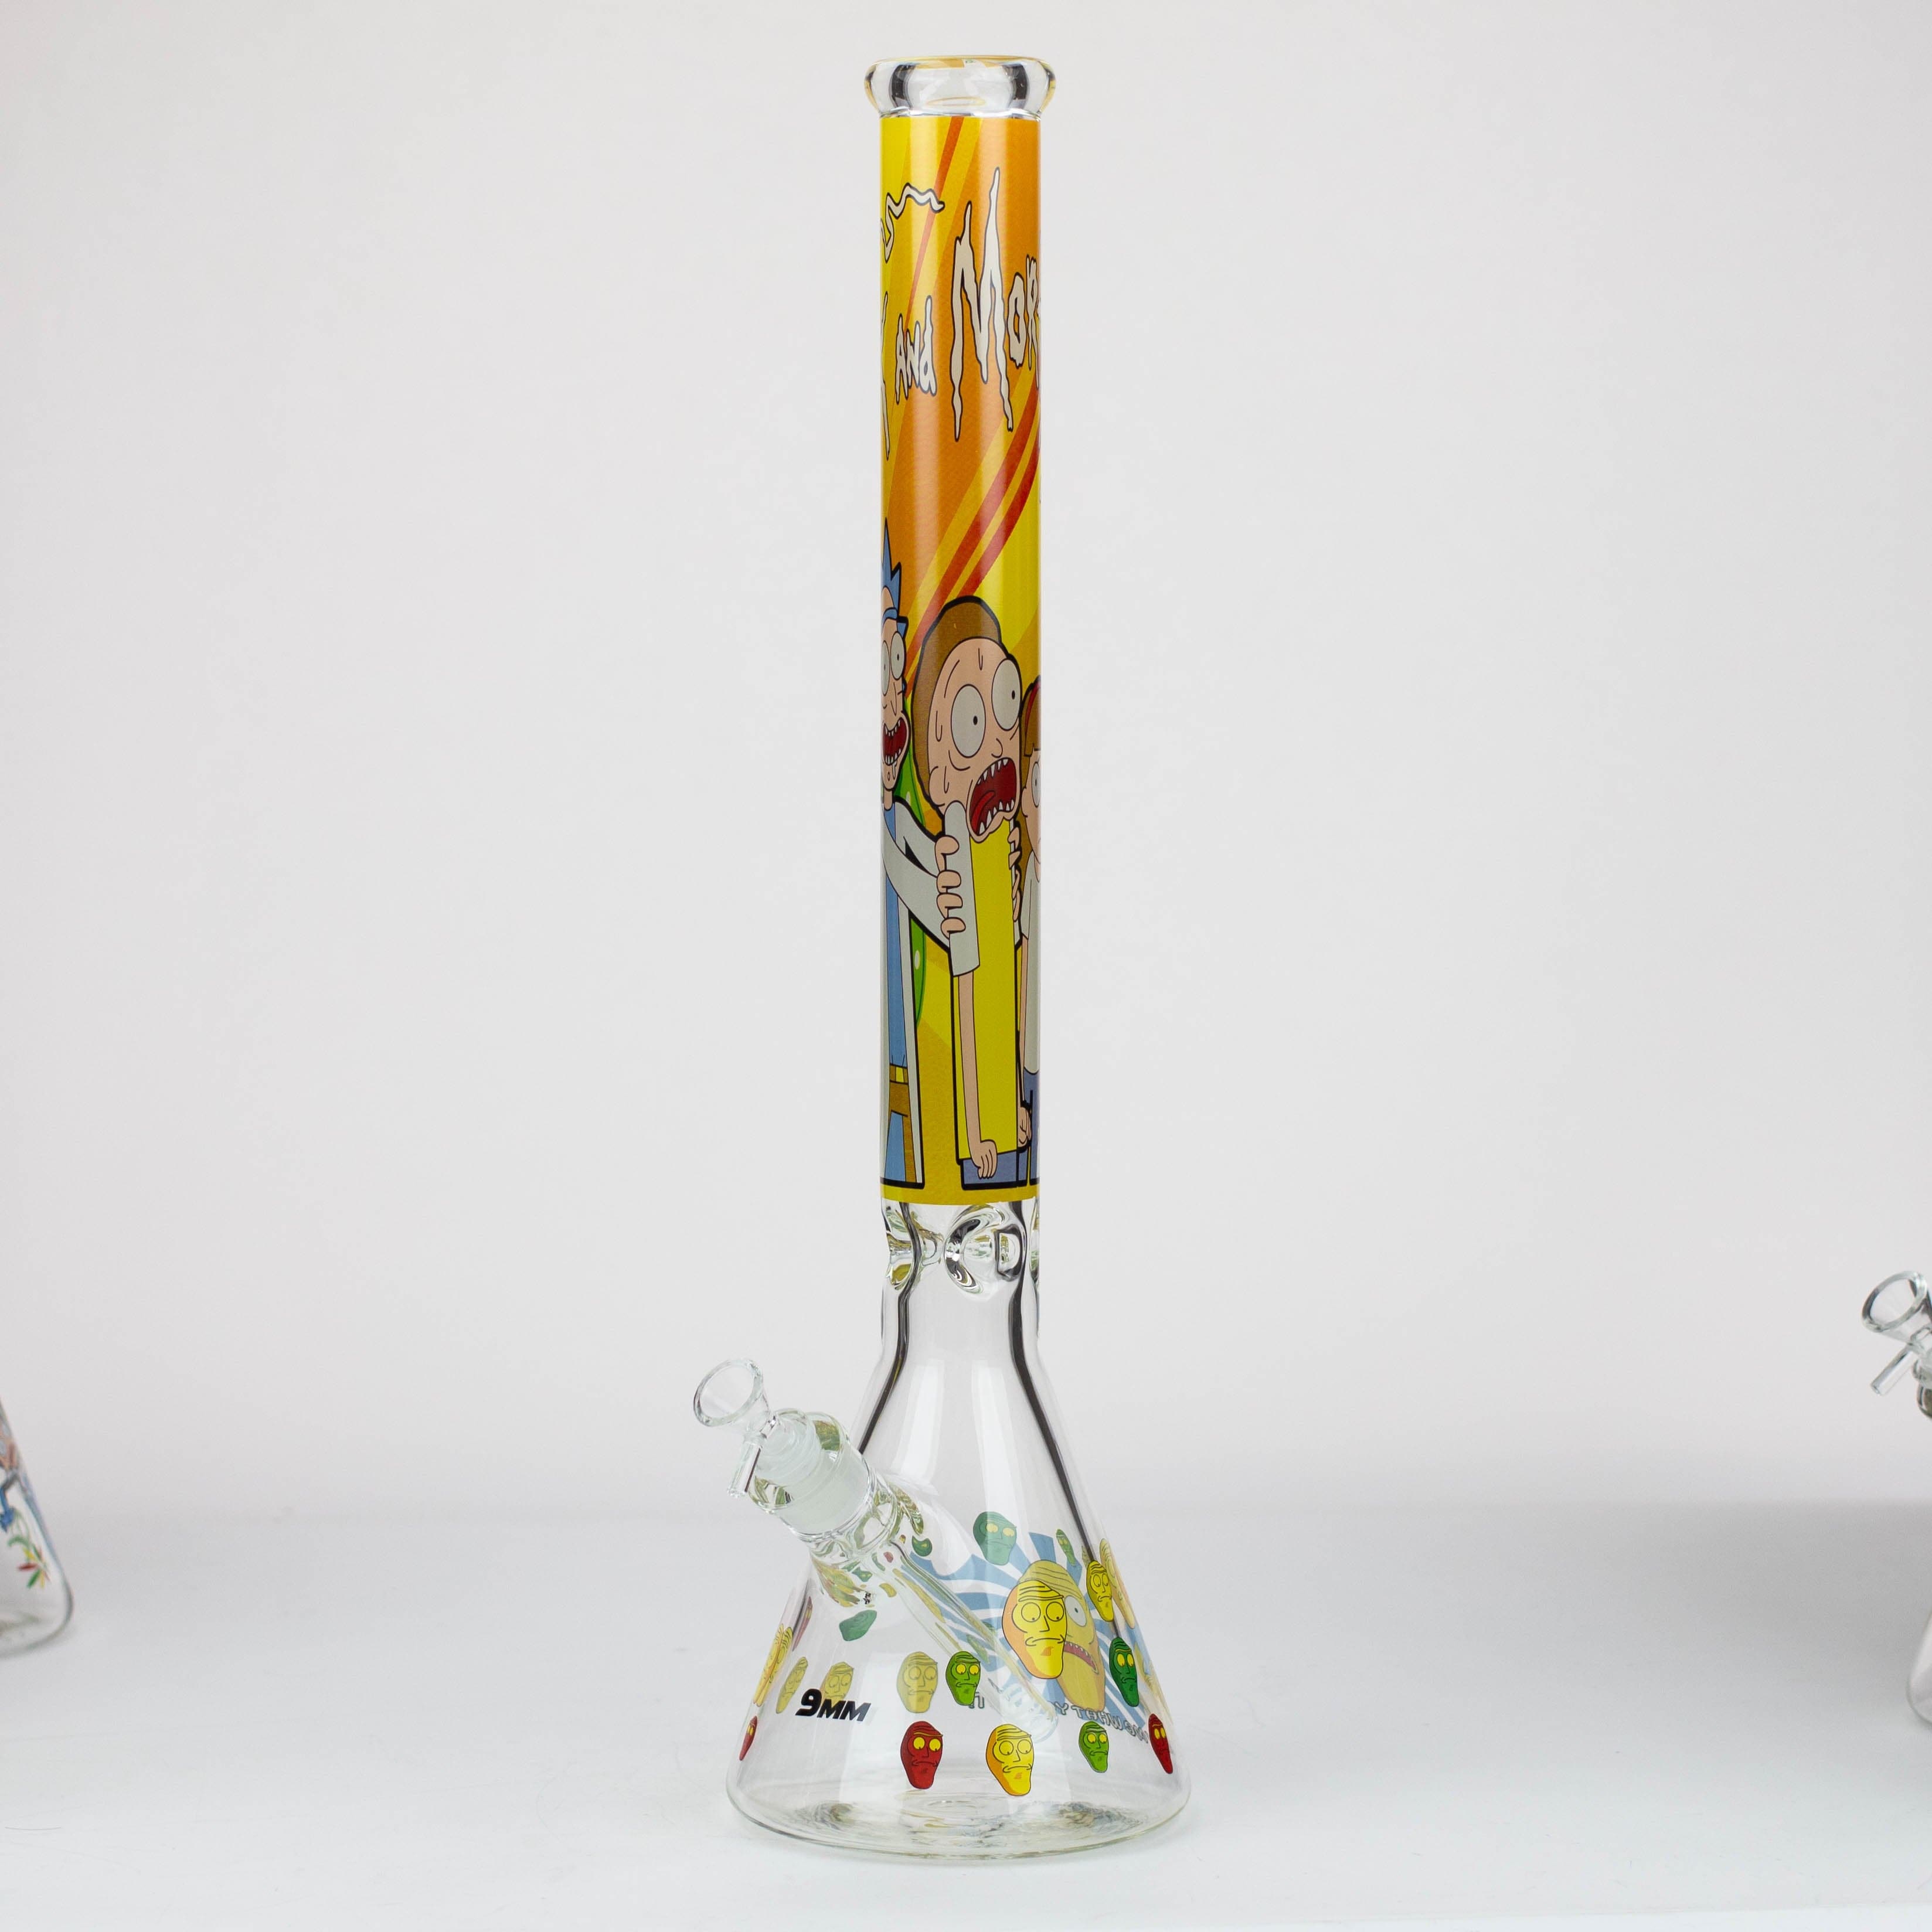 RM Cartoon 9 mm glass water pipes 22"_11